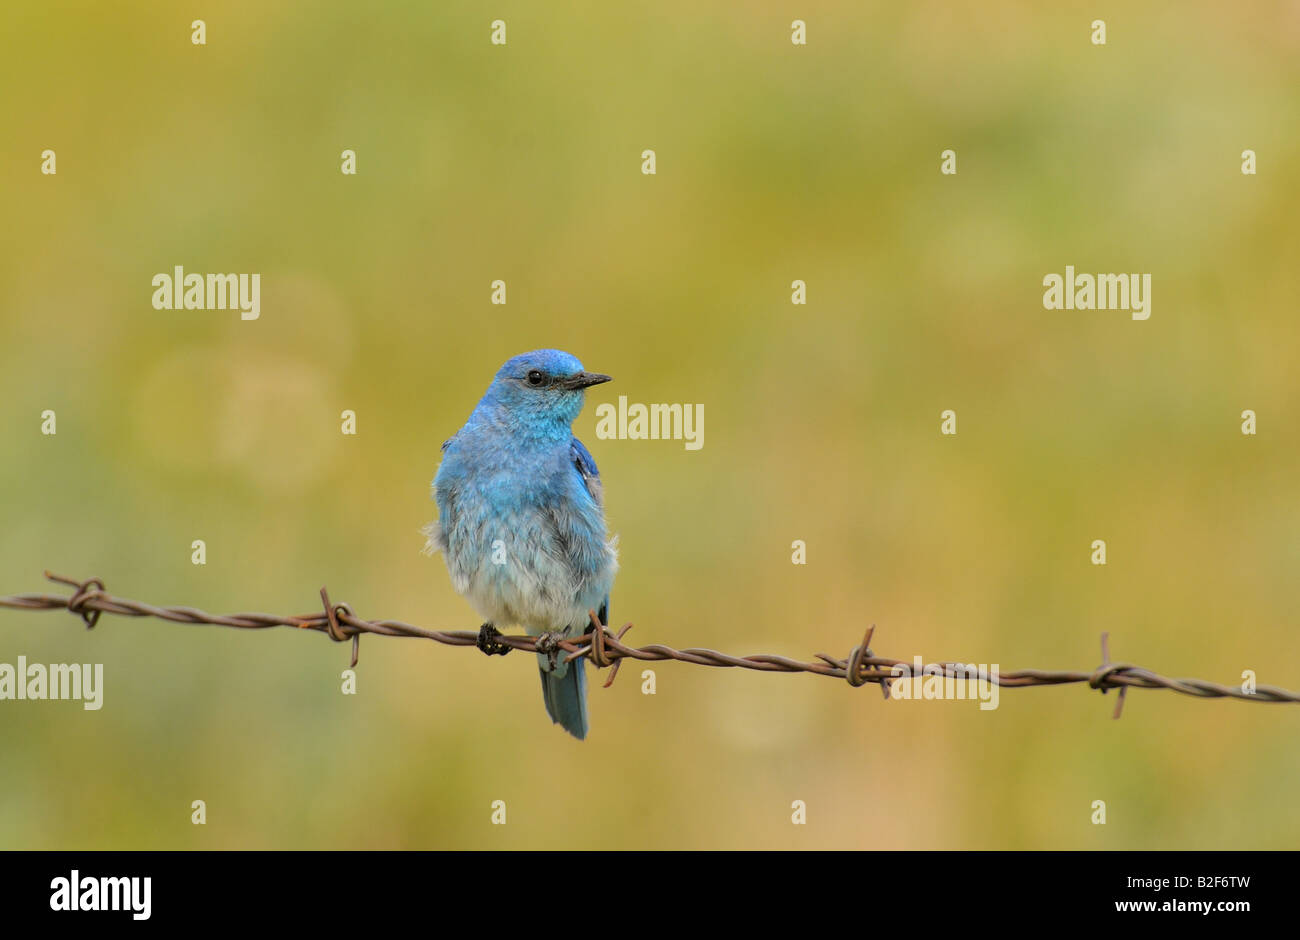 A male mountain blue bird sits perched on a barbed wire fence Stock Photo